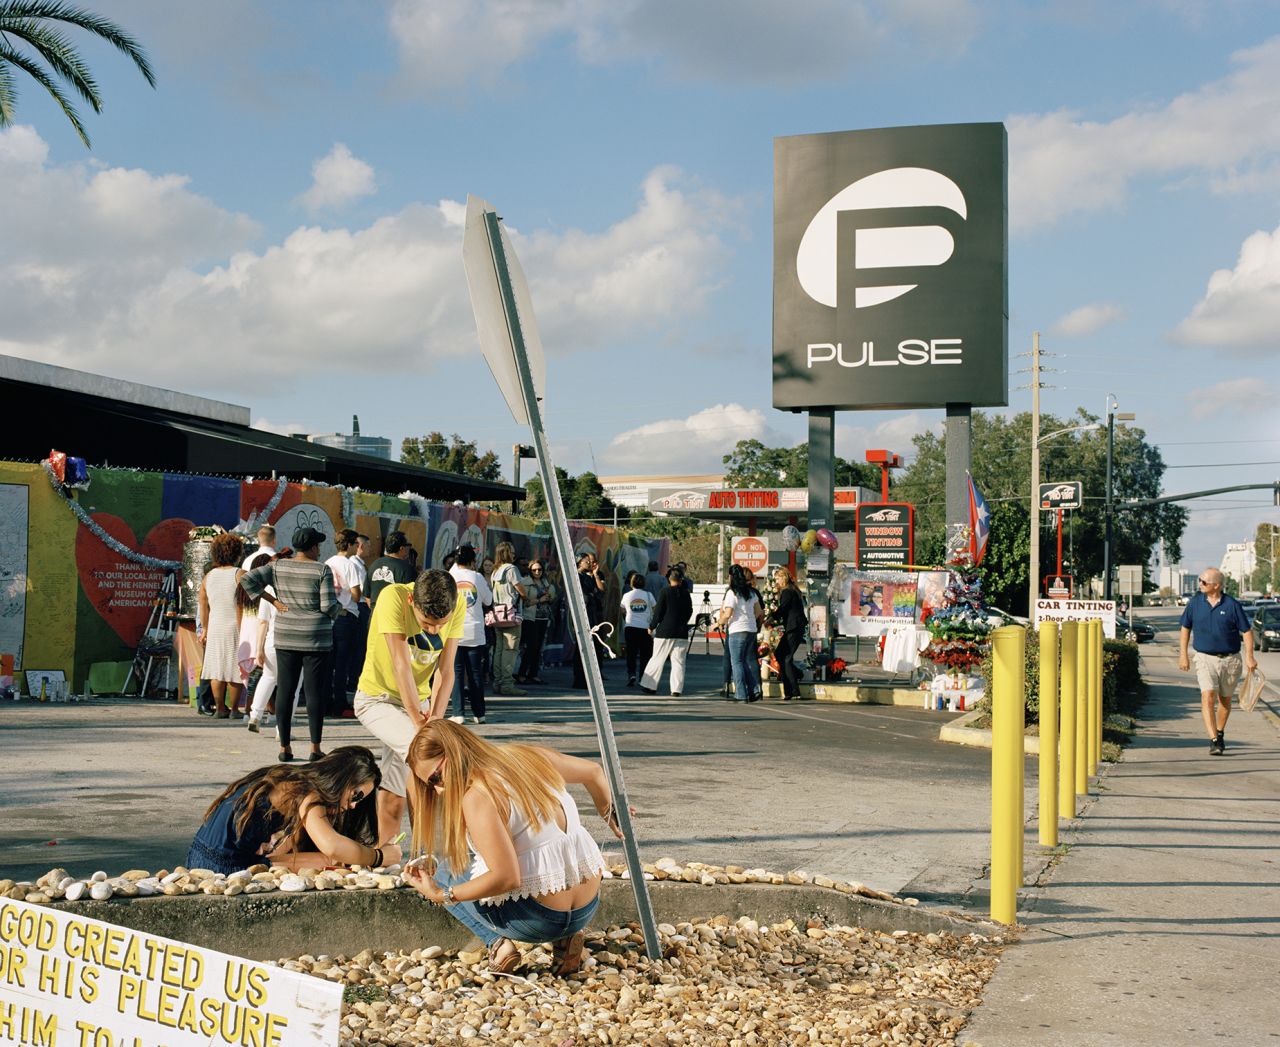 Photographers picturing scenes of tragedy often lean heavily on visual tropes to communicate with viewers, Pinkcers said. He took this photo at Pulse, a gay nightclub in Orlando, Florida, where 49 people were killed and 58 others wounded by gunman Omar Mateen in June 2016.